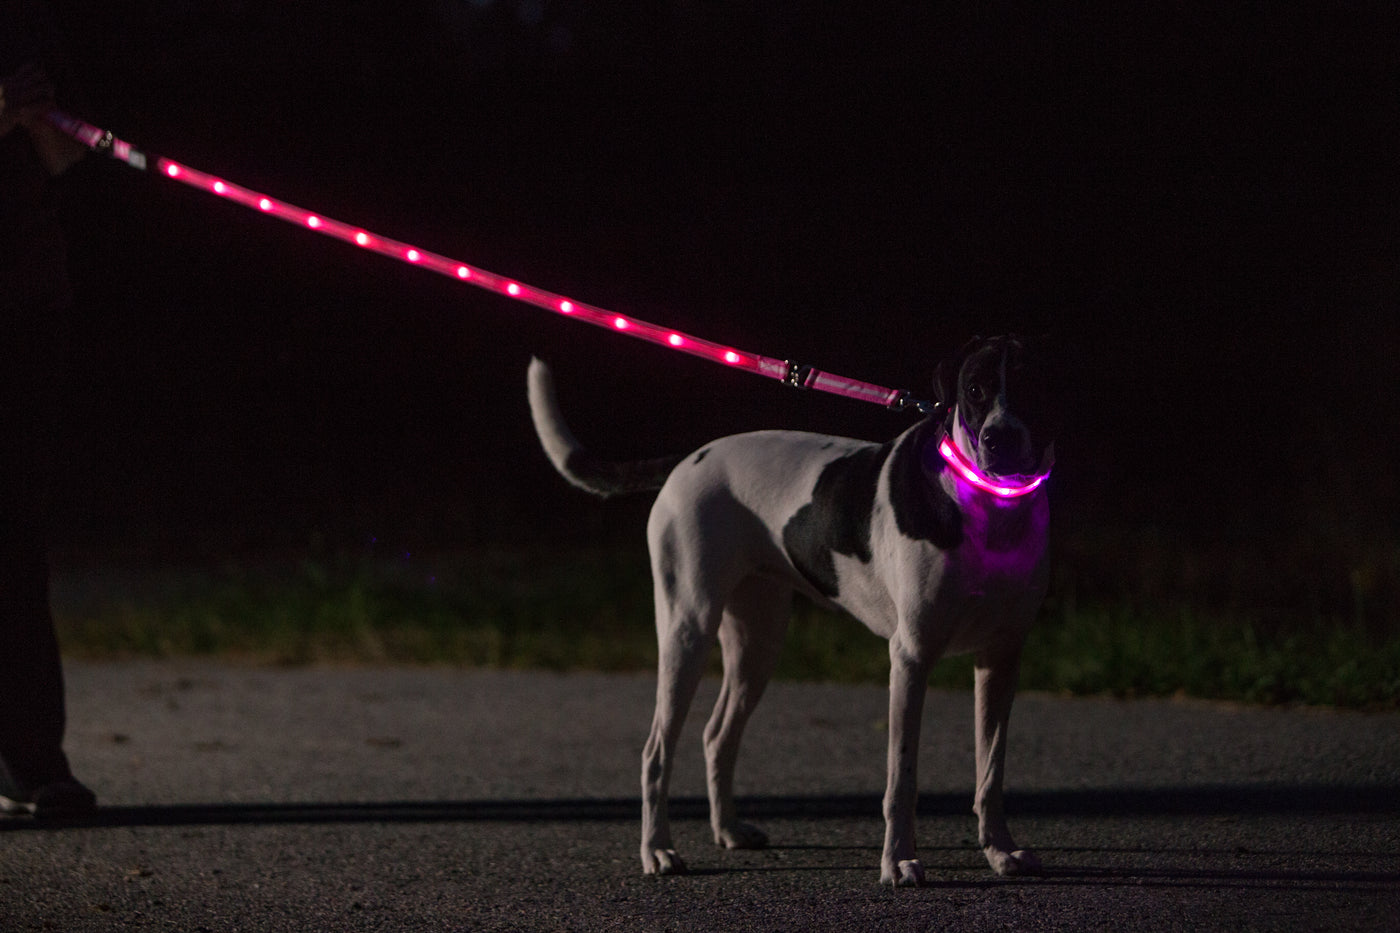 Nite Beams LED USB Rechargeable Lighted Dog Leash